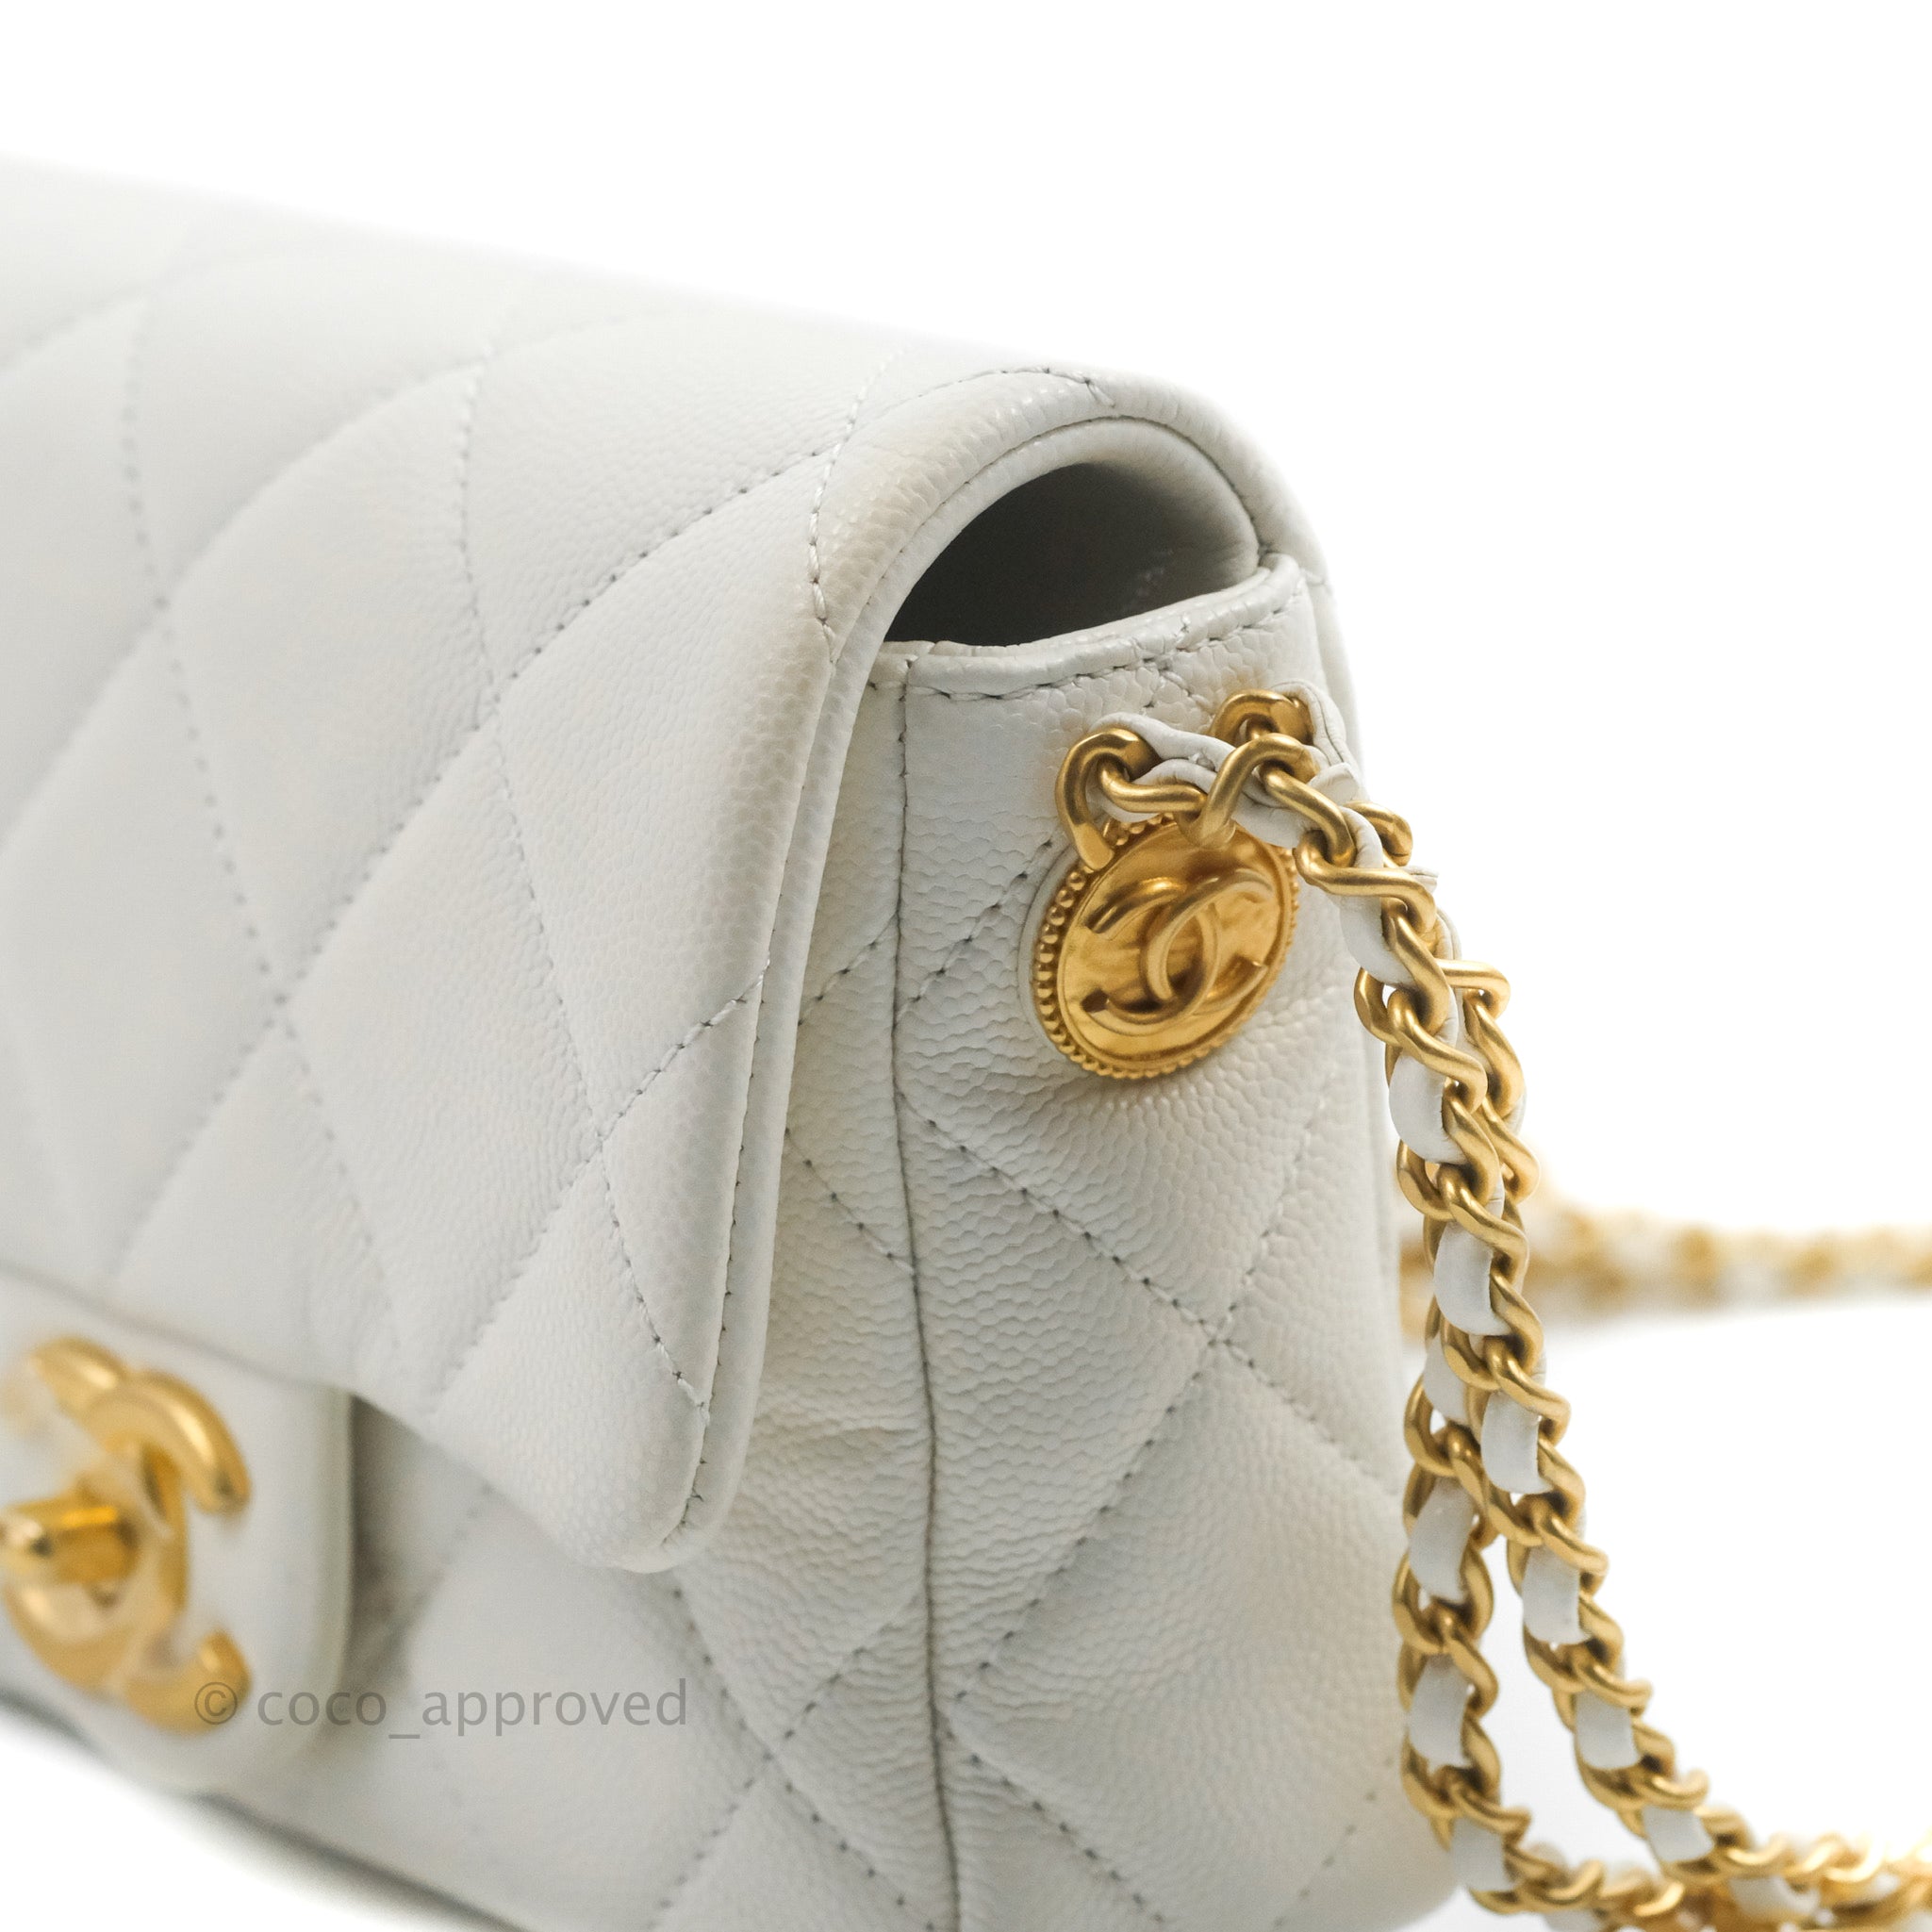 Chanel Mini Flap Bag with Coco Heart Chain White Lambskin Aged